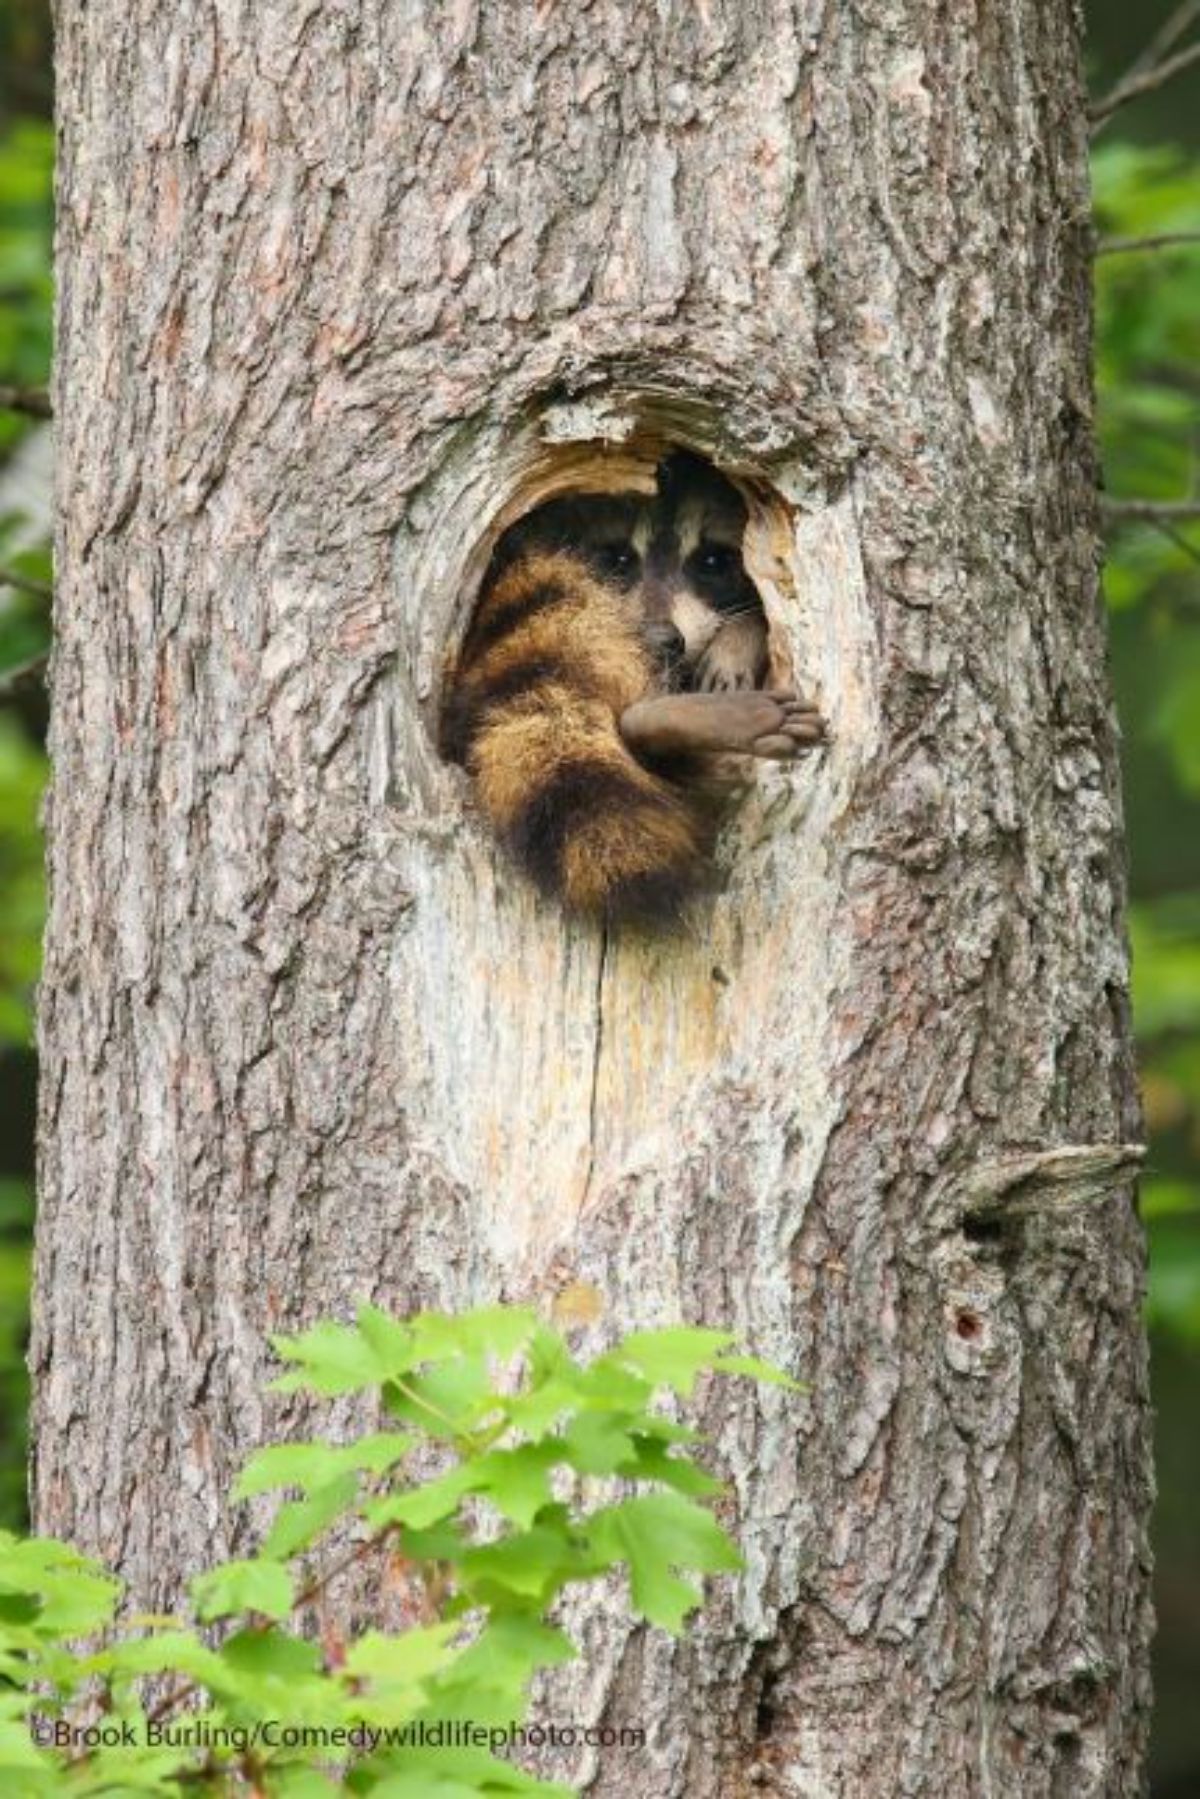 raccoon stuffed inside a hole in a tree trunk with the leg and tail sticking out